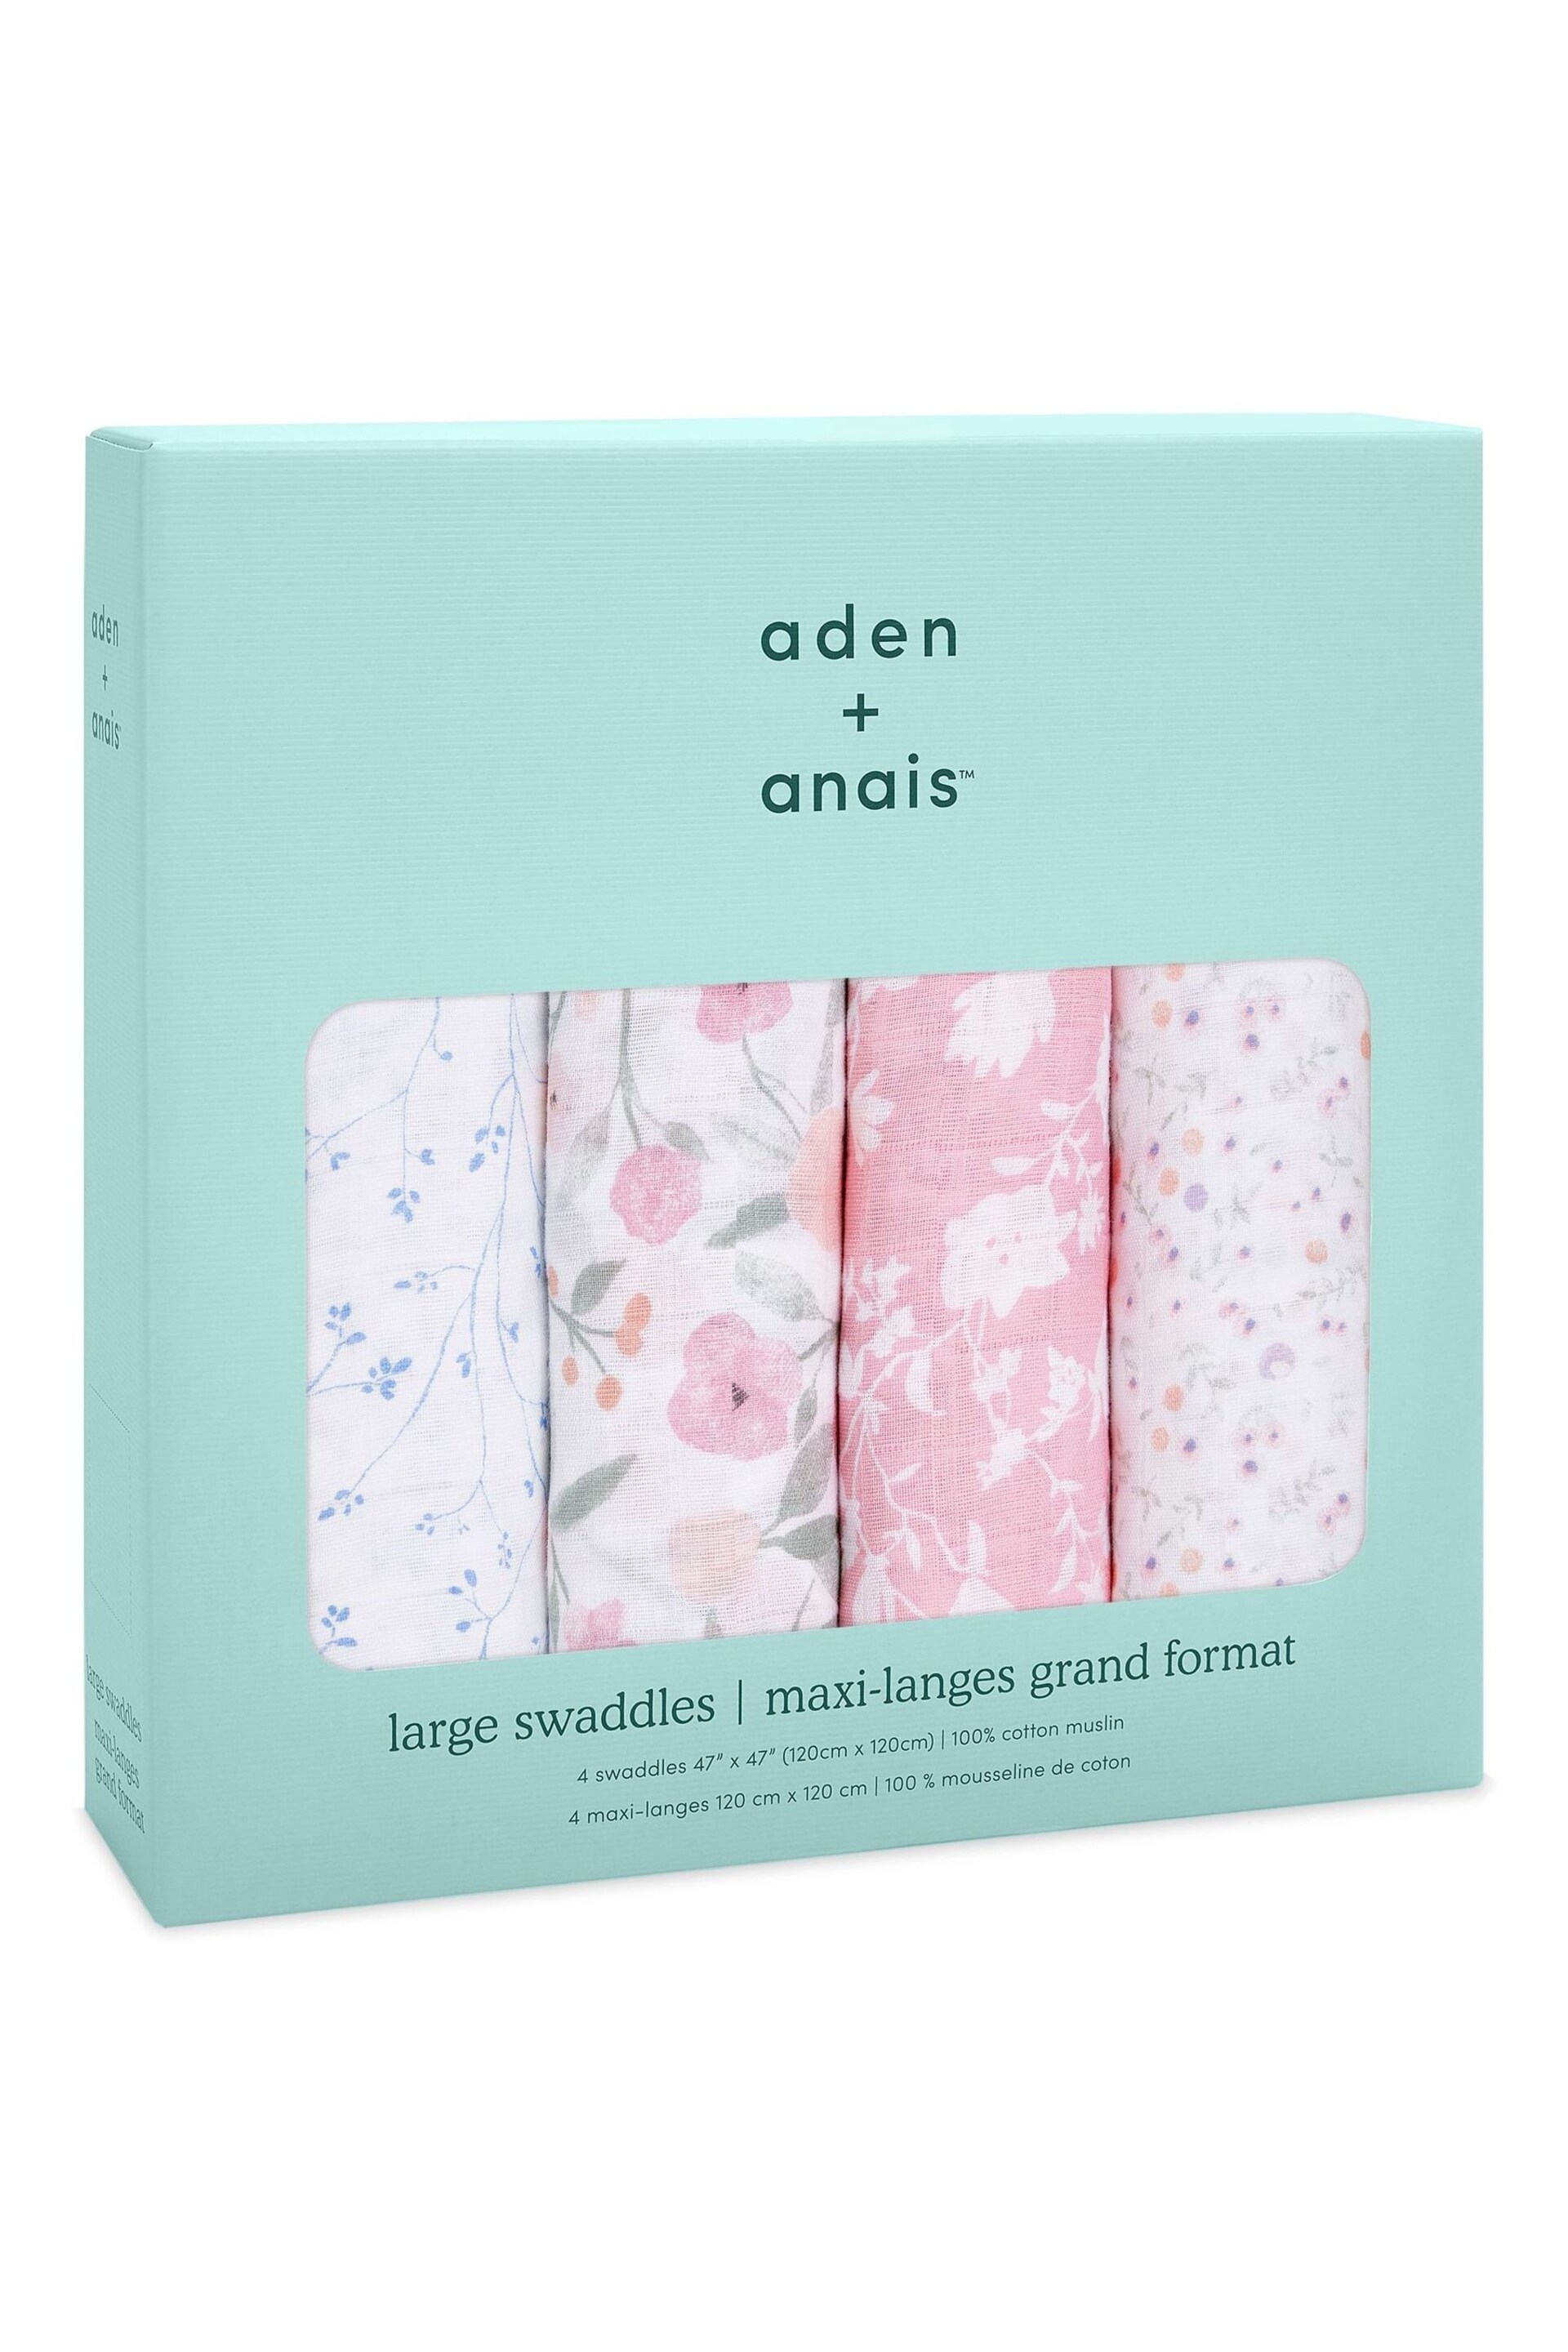 aden + anais ma fleur Large Cotton Muslin Blankets 4 Pack - Image 2 of 5